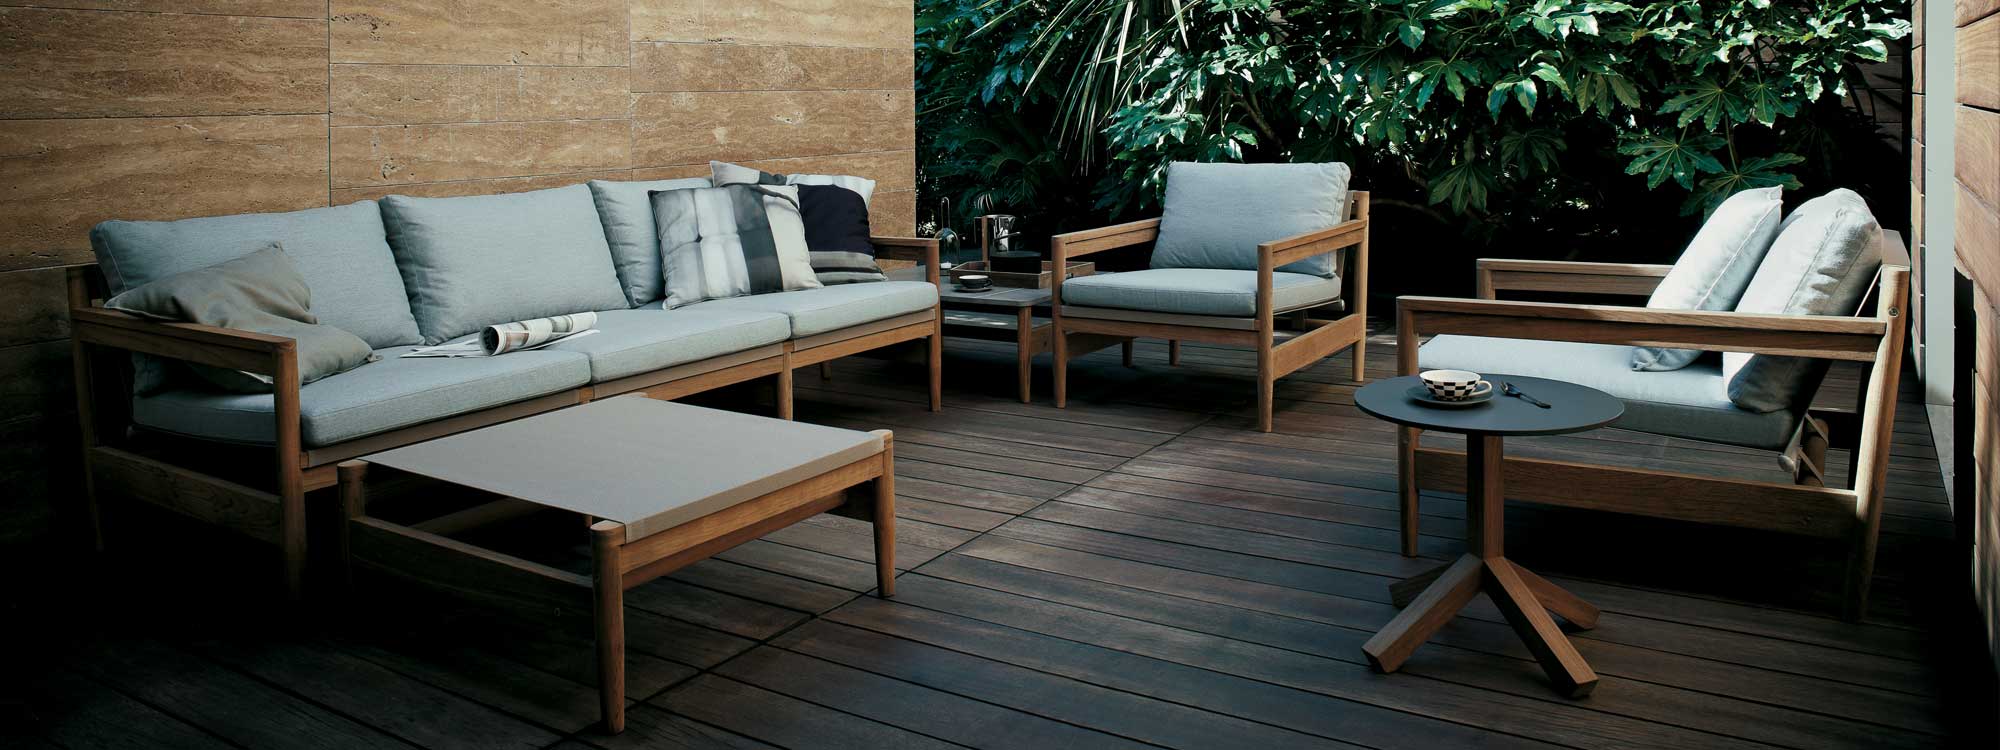 Image of wooden decked sheltered courtyard with RODA Road teak sofa, lounge chairs and foot rest, together with Root minimalist side table